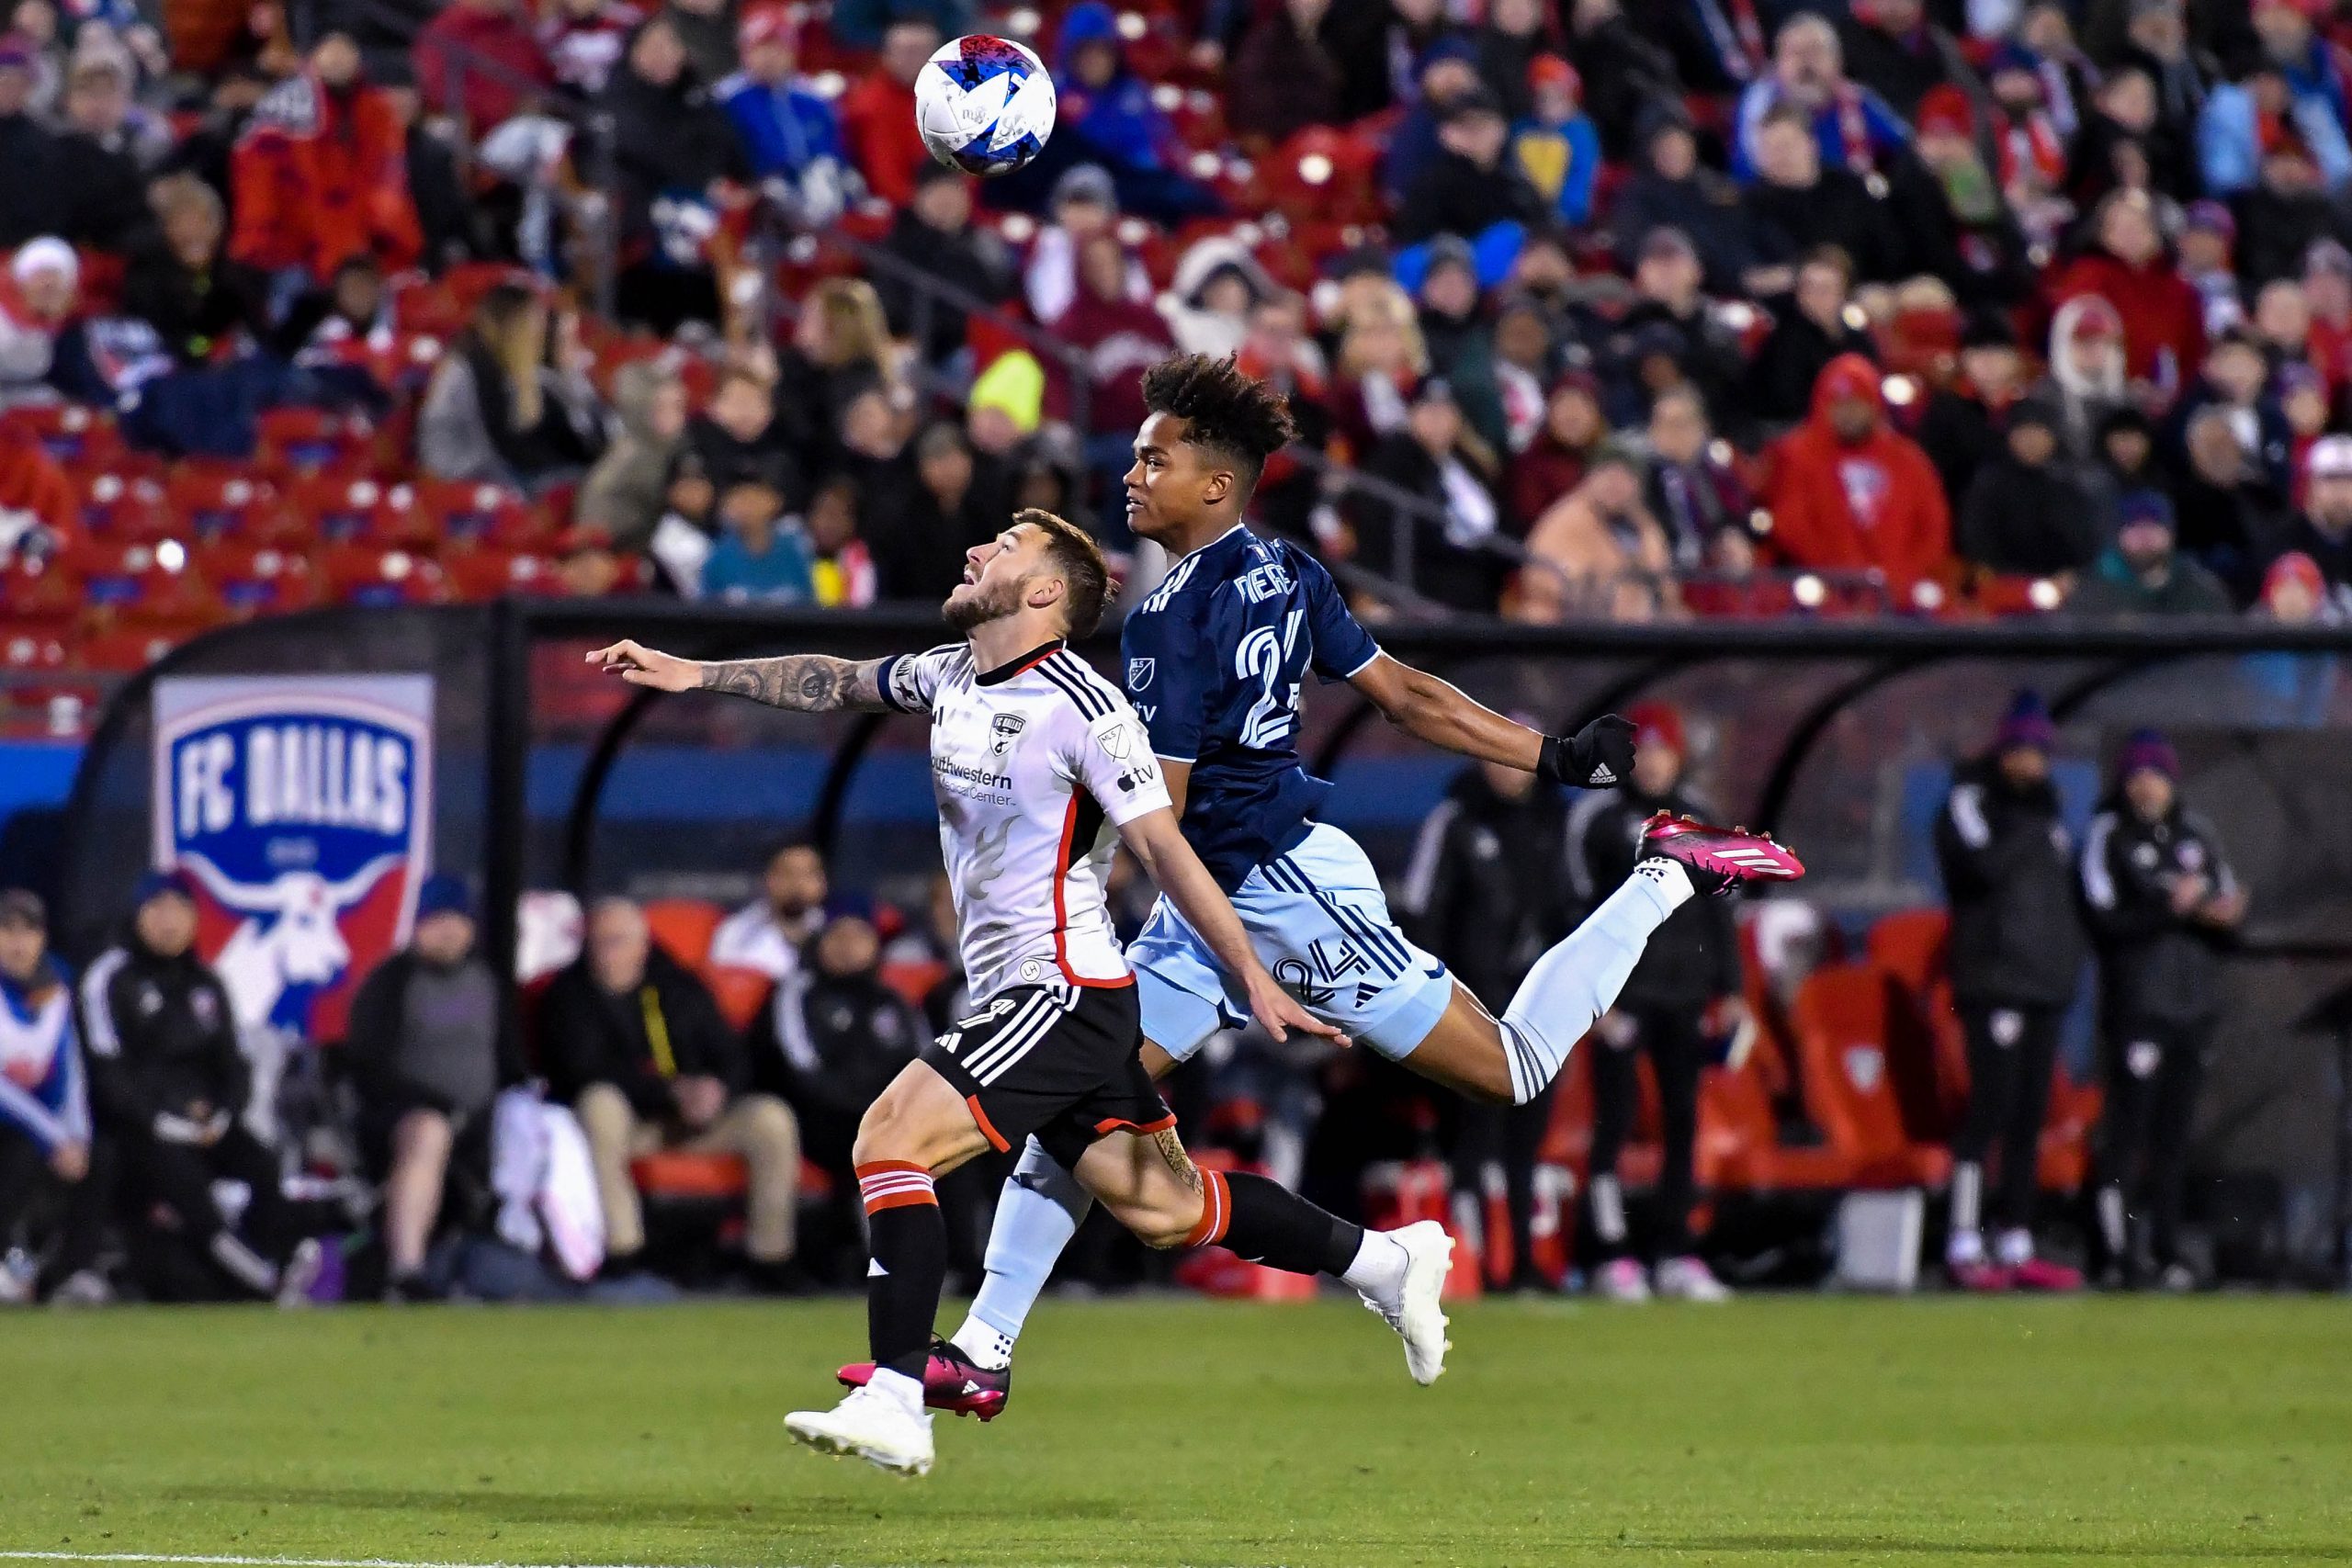 Paul Arriola runs underneath a ball headed by Sporting KC defender Kayden Pierre in the MLS match on Saturday, March 18, 2023, at Toyota Stadium. (Daniel McCullough, 3rd Degree)